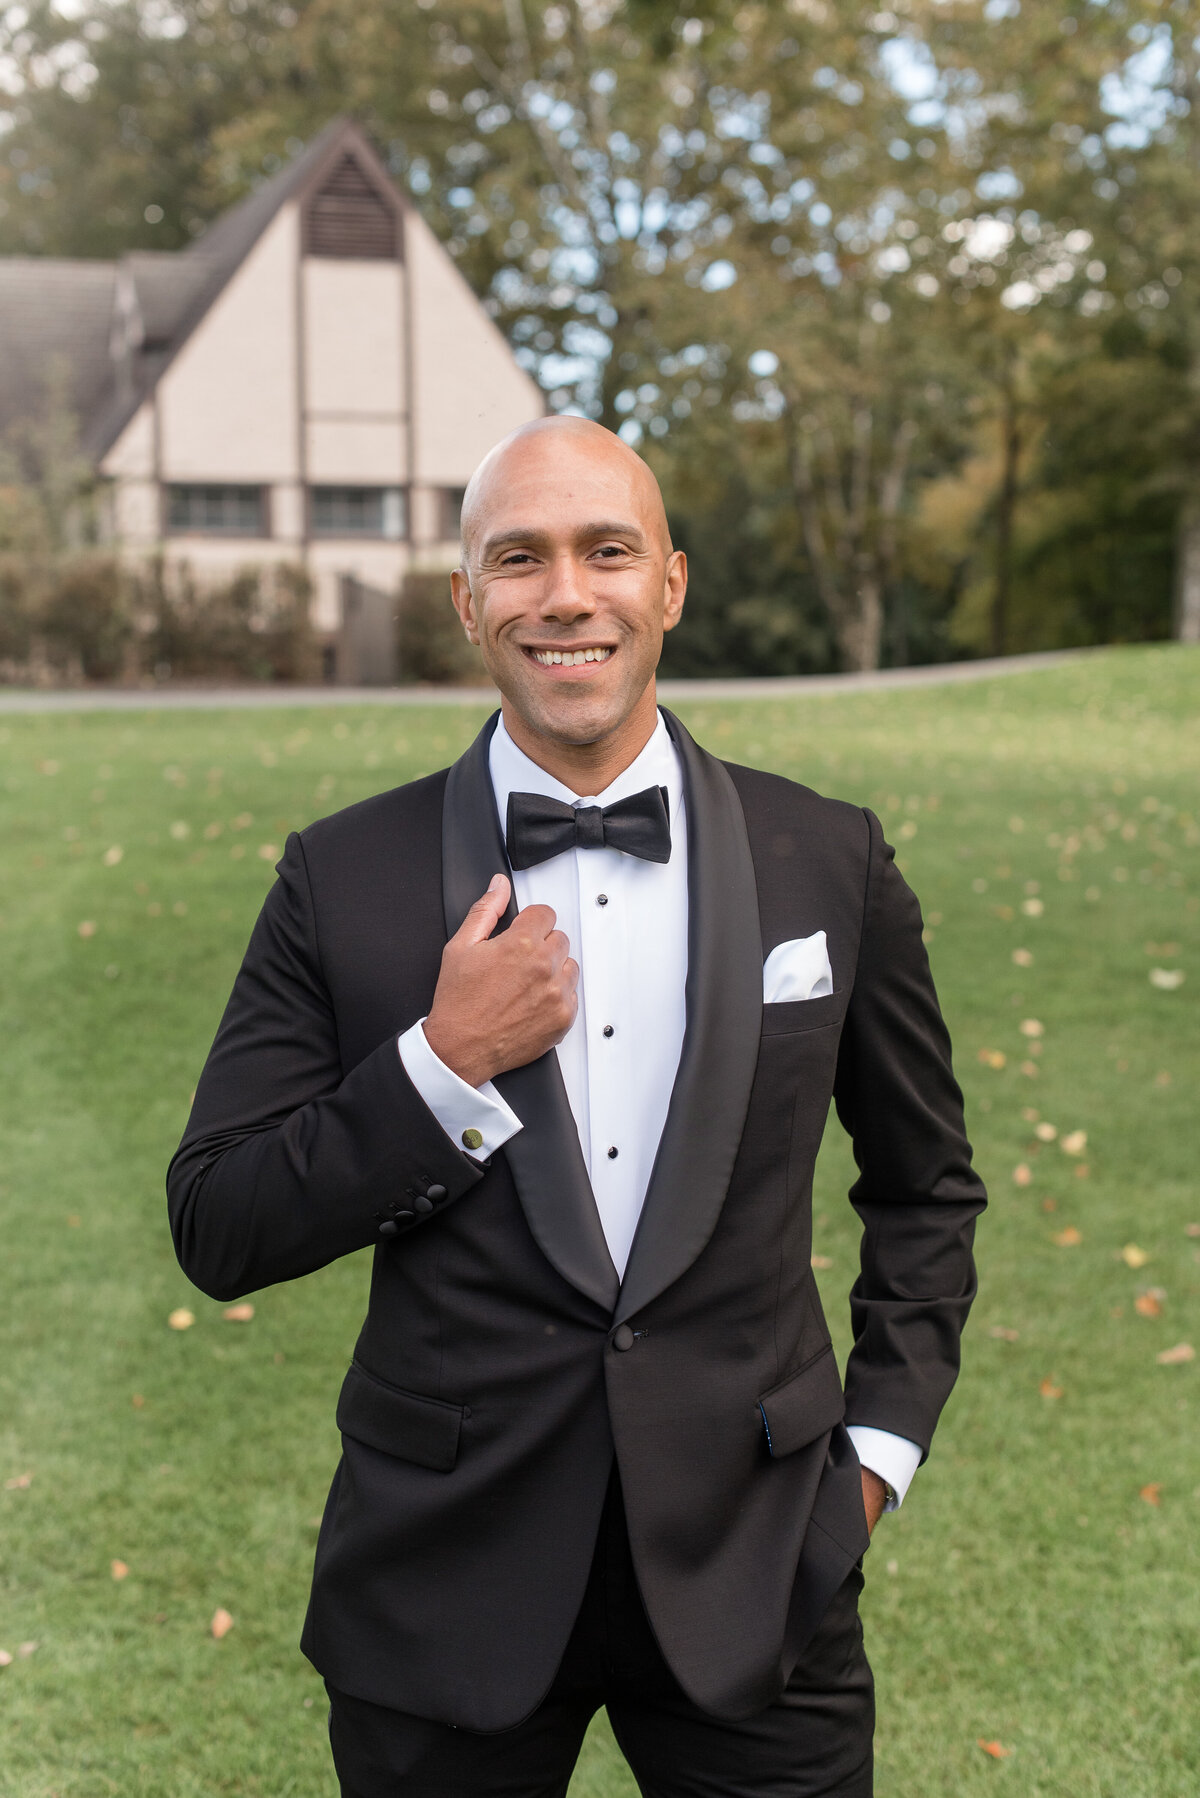 Groom Portrait of groom holding lapel with one hand and other hand in pocket smiling at camera